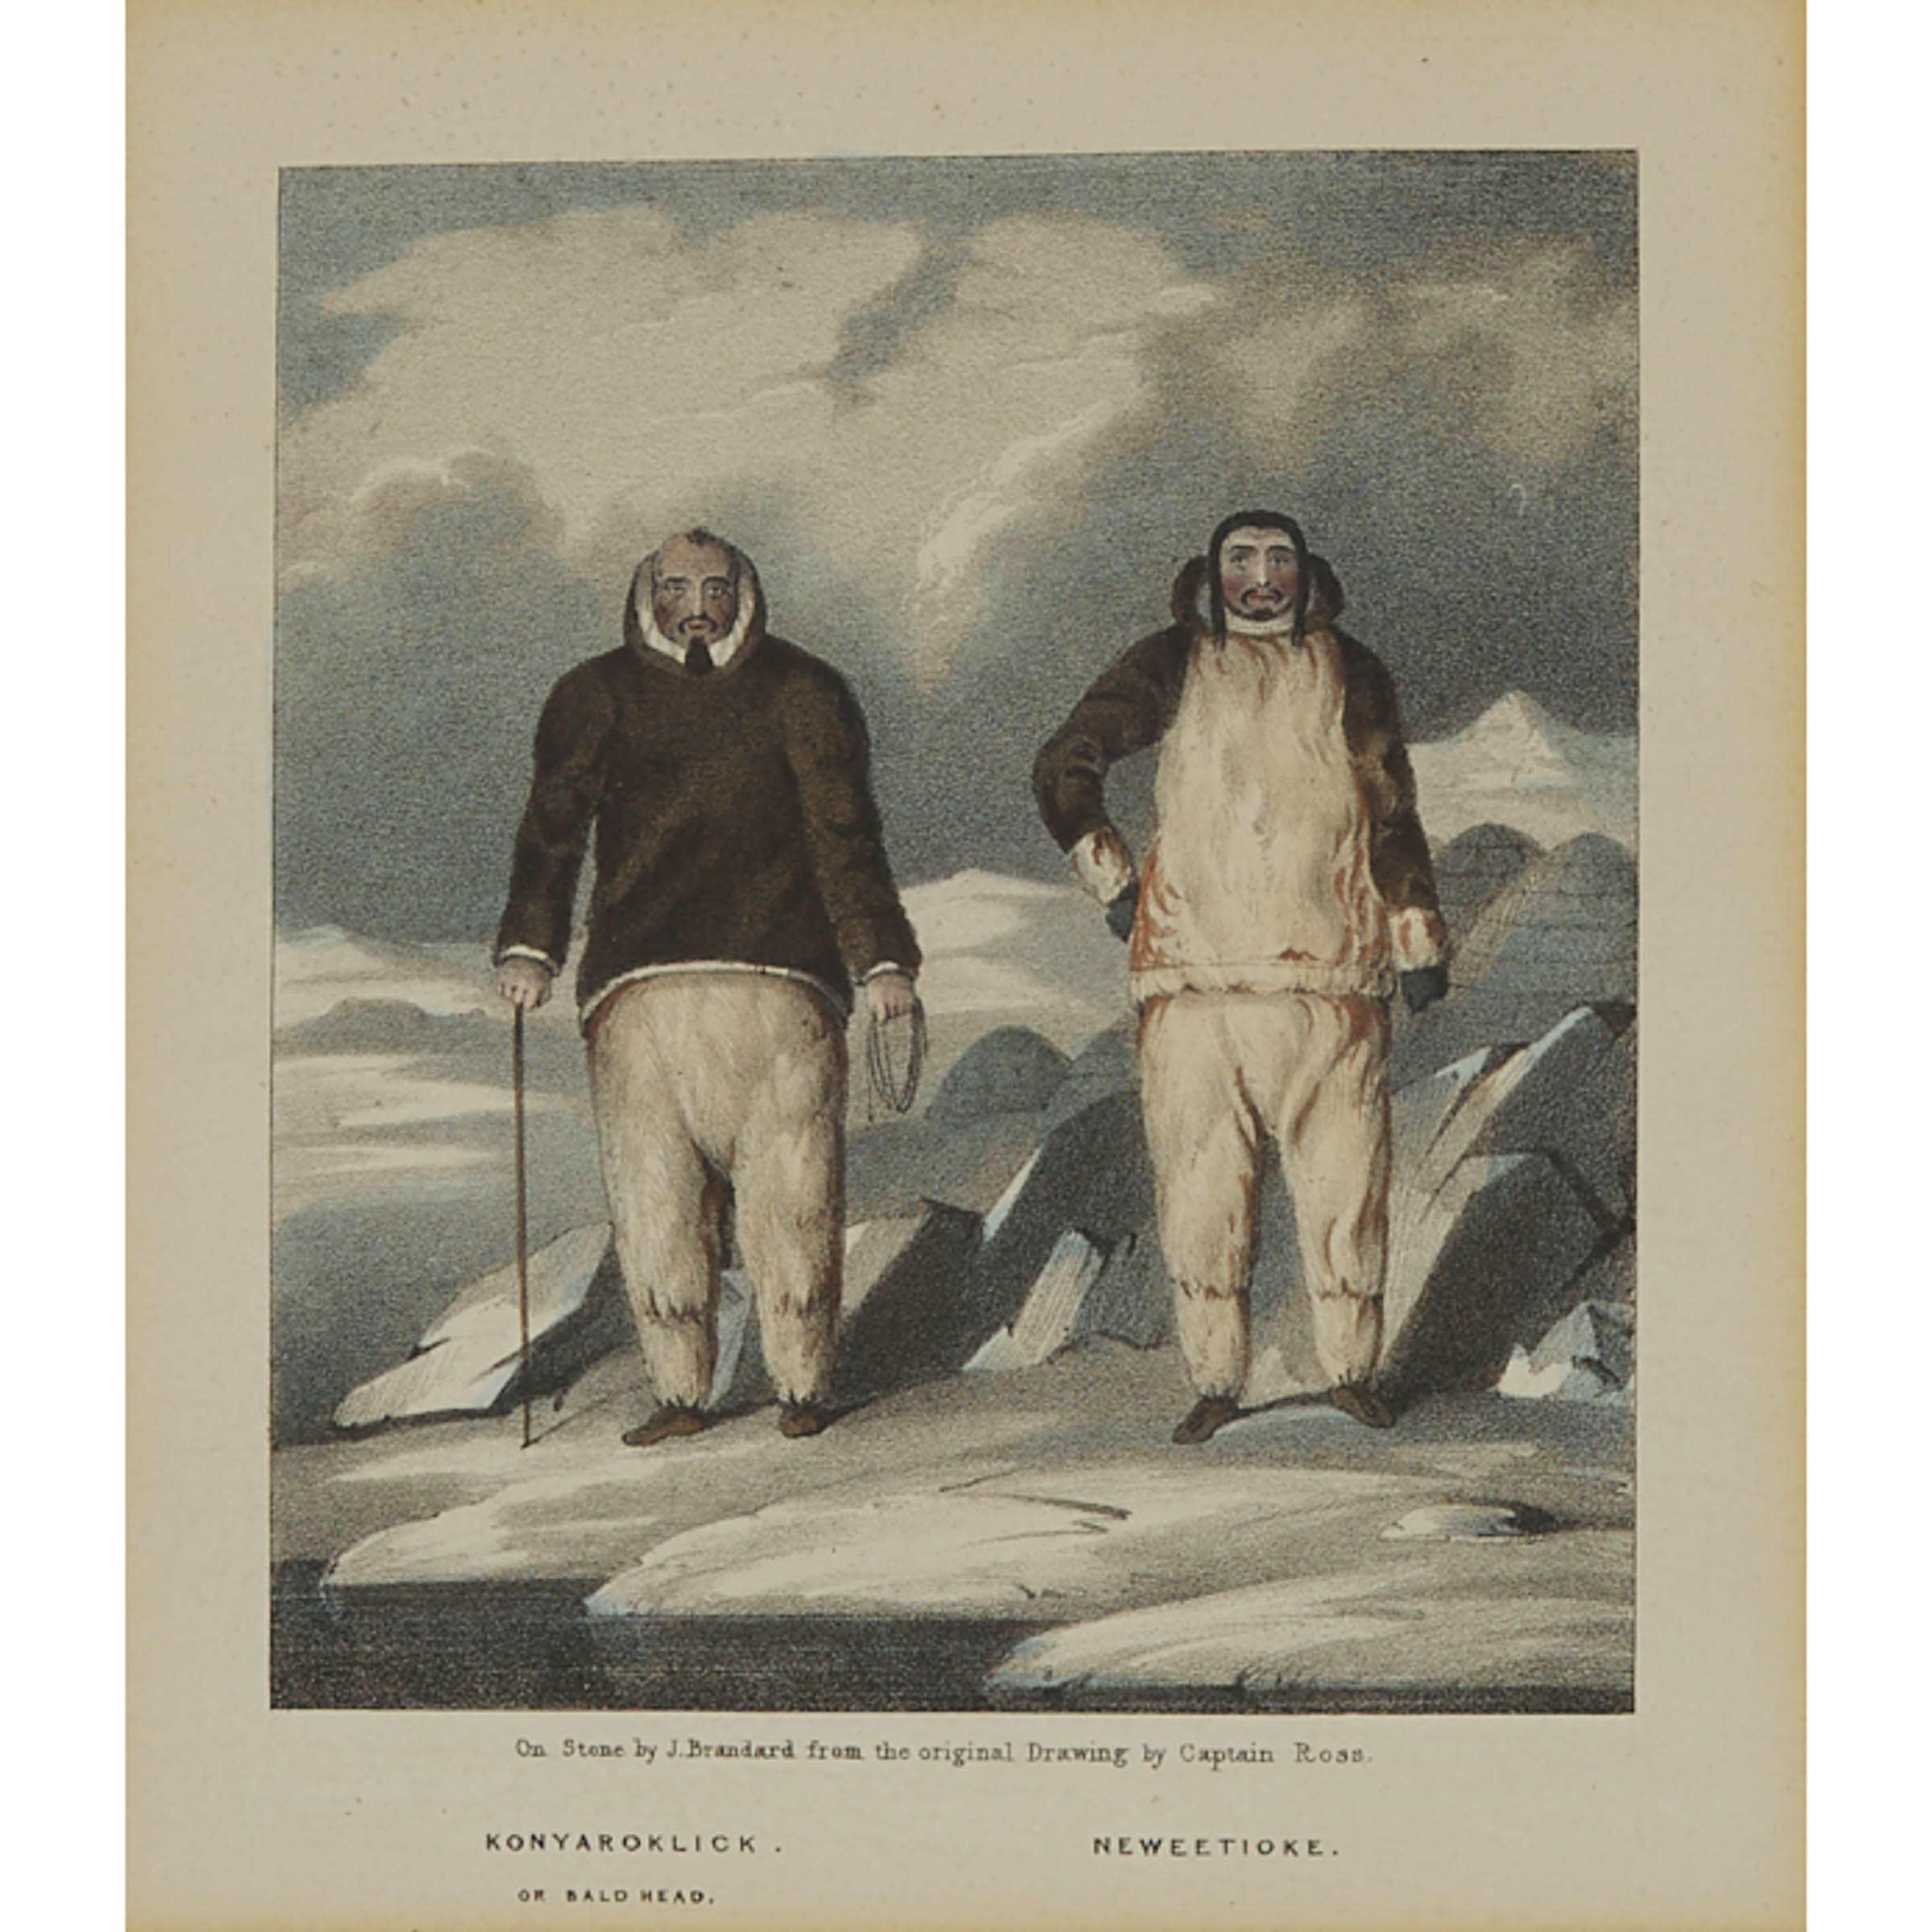 Set of Four Prints from Captain Ross's 'Narrative of a Second Voyage in Search of a North-West Passage', 1835 